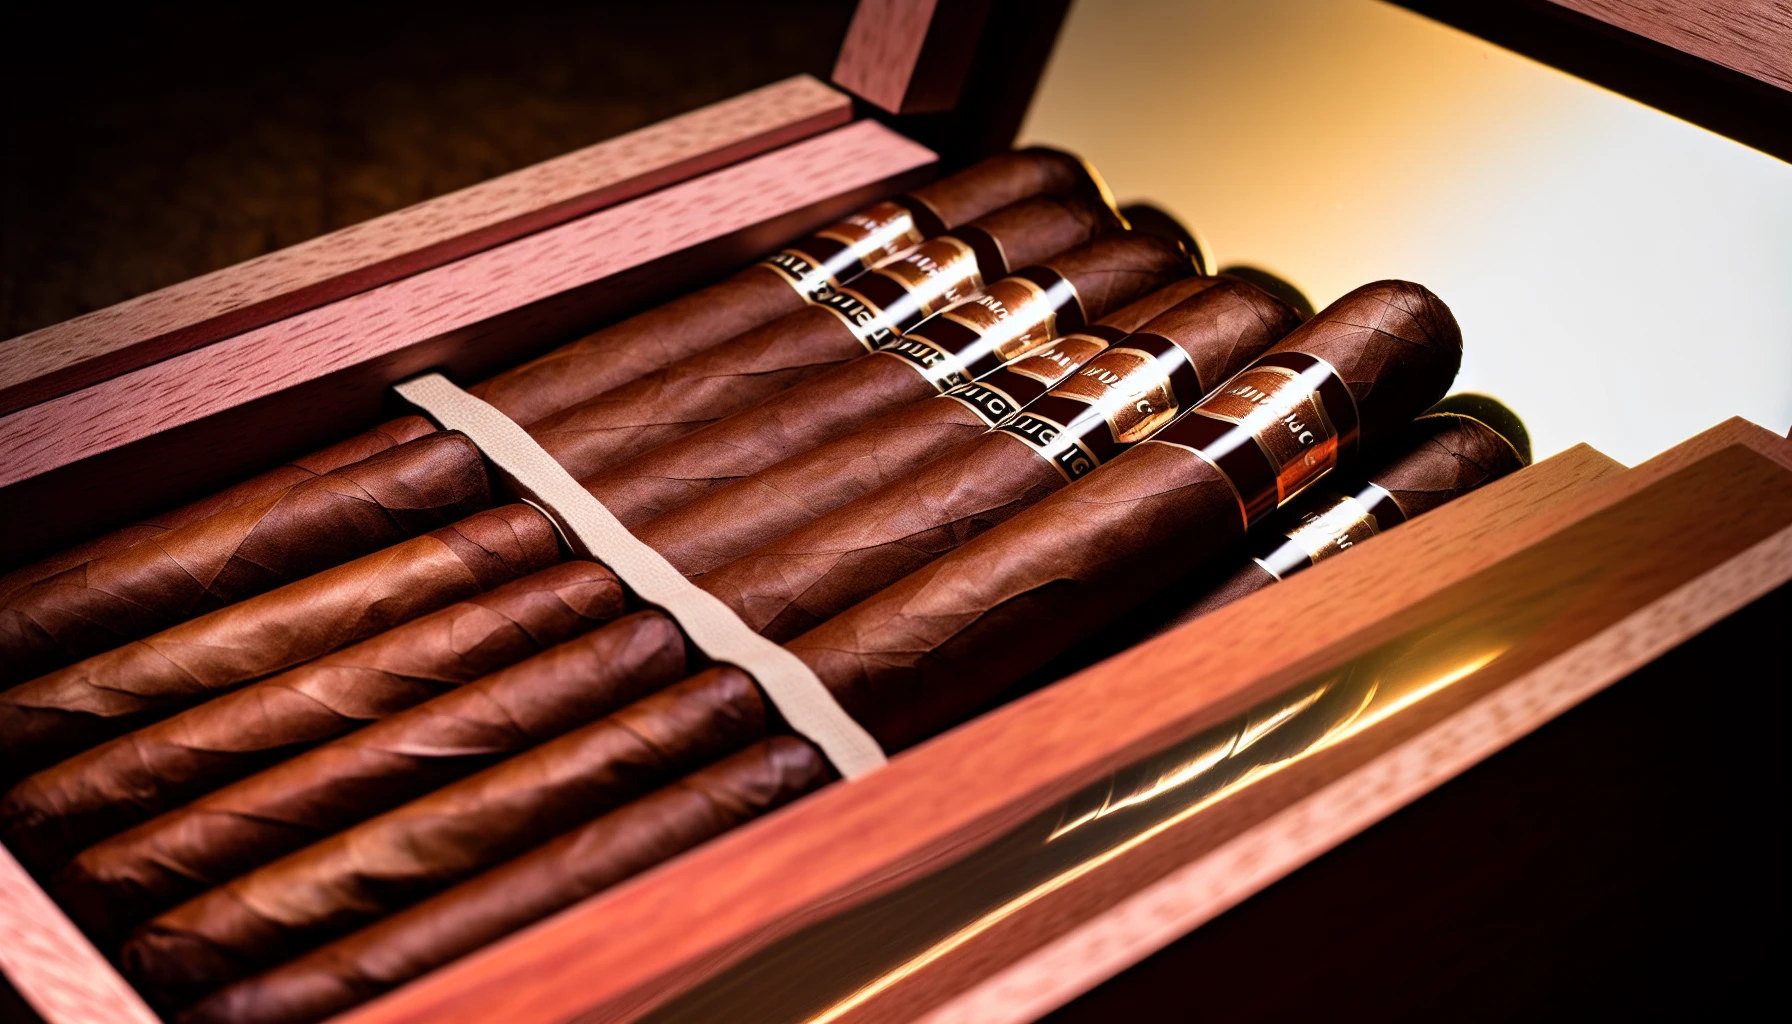 A box of Bellas Artes Maduro cigars with a rich, dark chocolate wrapper, representing the exquisite flavor profile and quality of the cigar